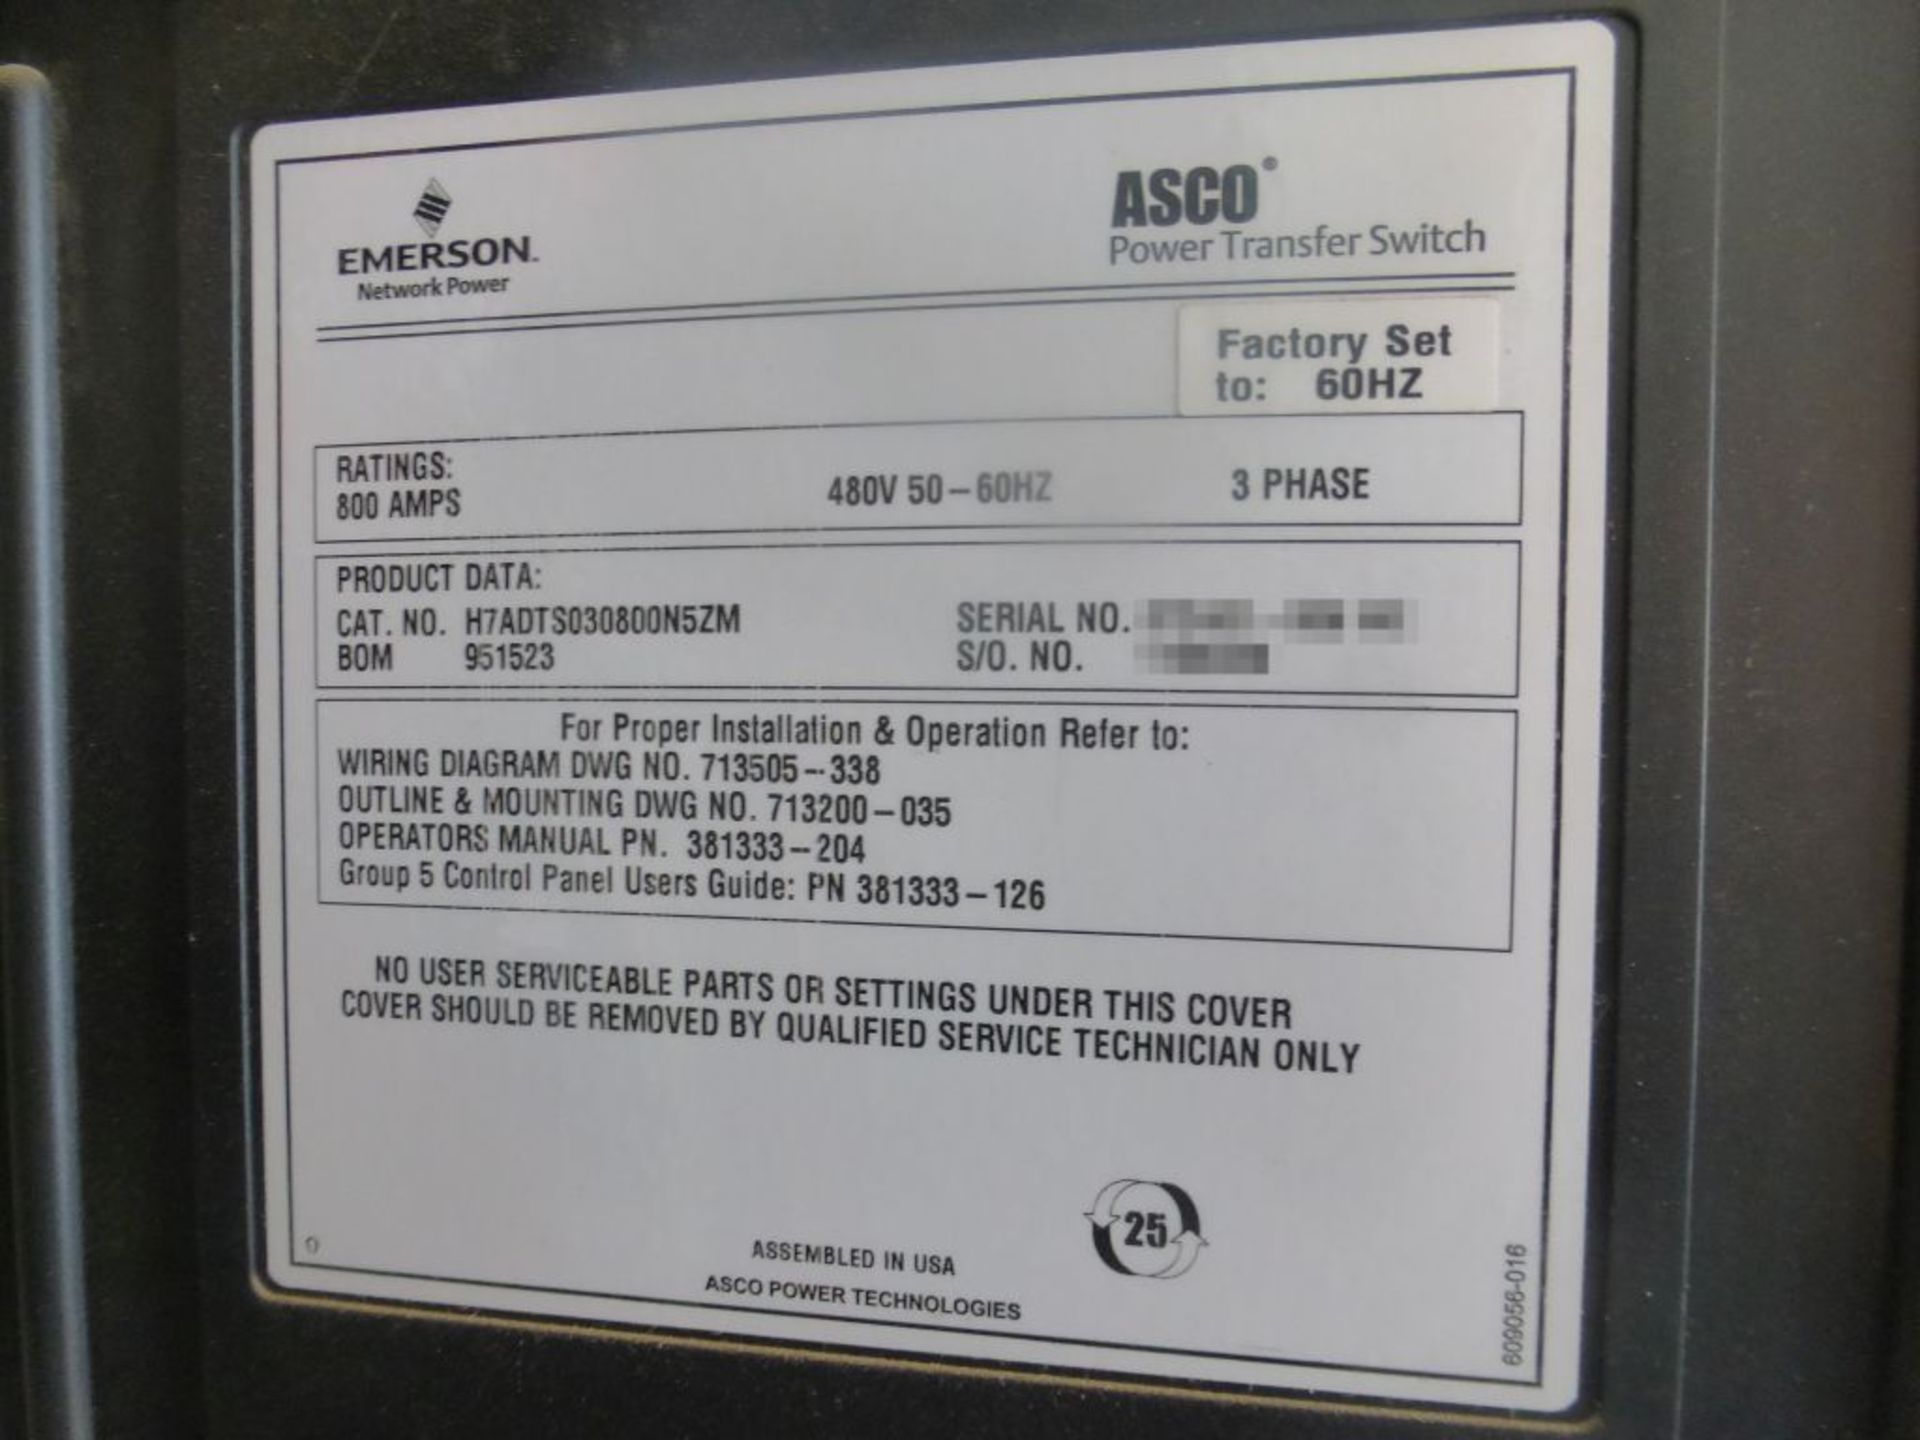 ASCO 7000 Series Power Transfer Switch | Lot Loading Fee: $50 | 800A; 480V; Tag: 233657 - Image 11 of 12